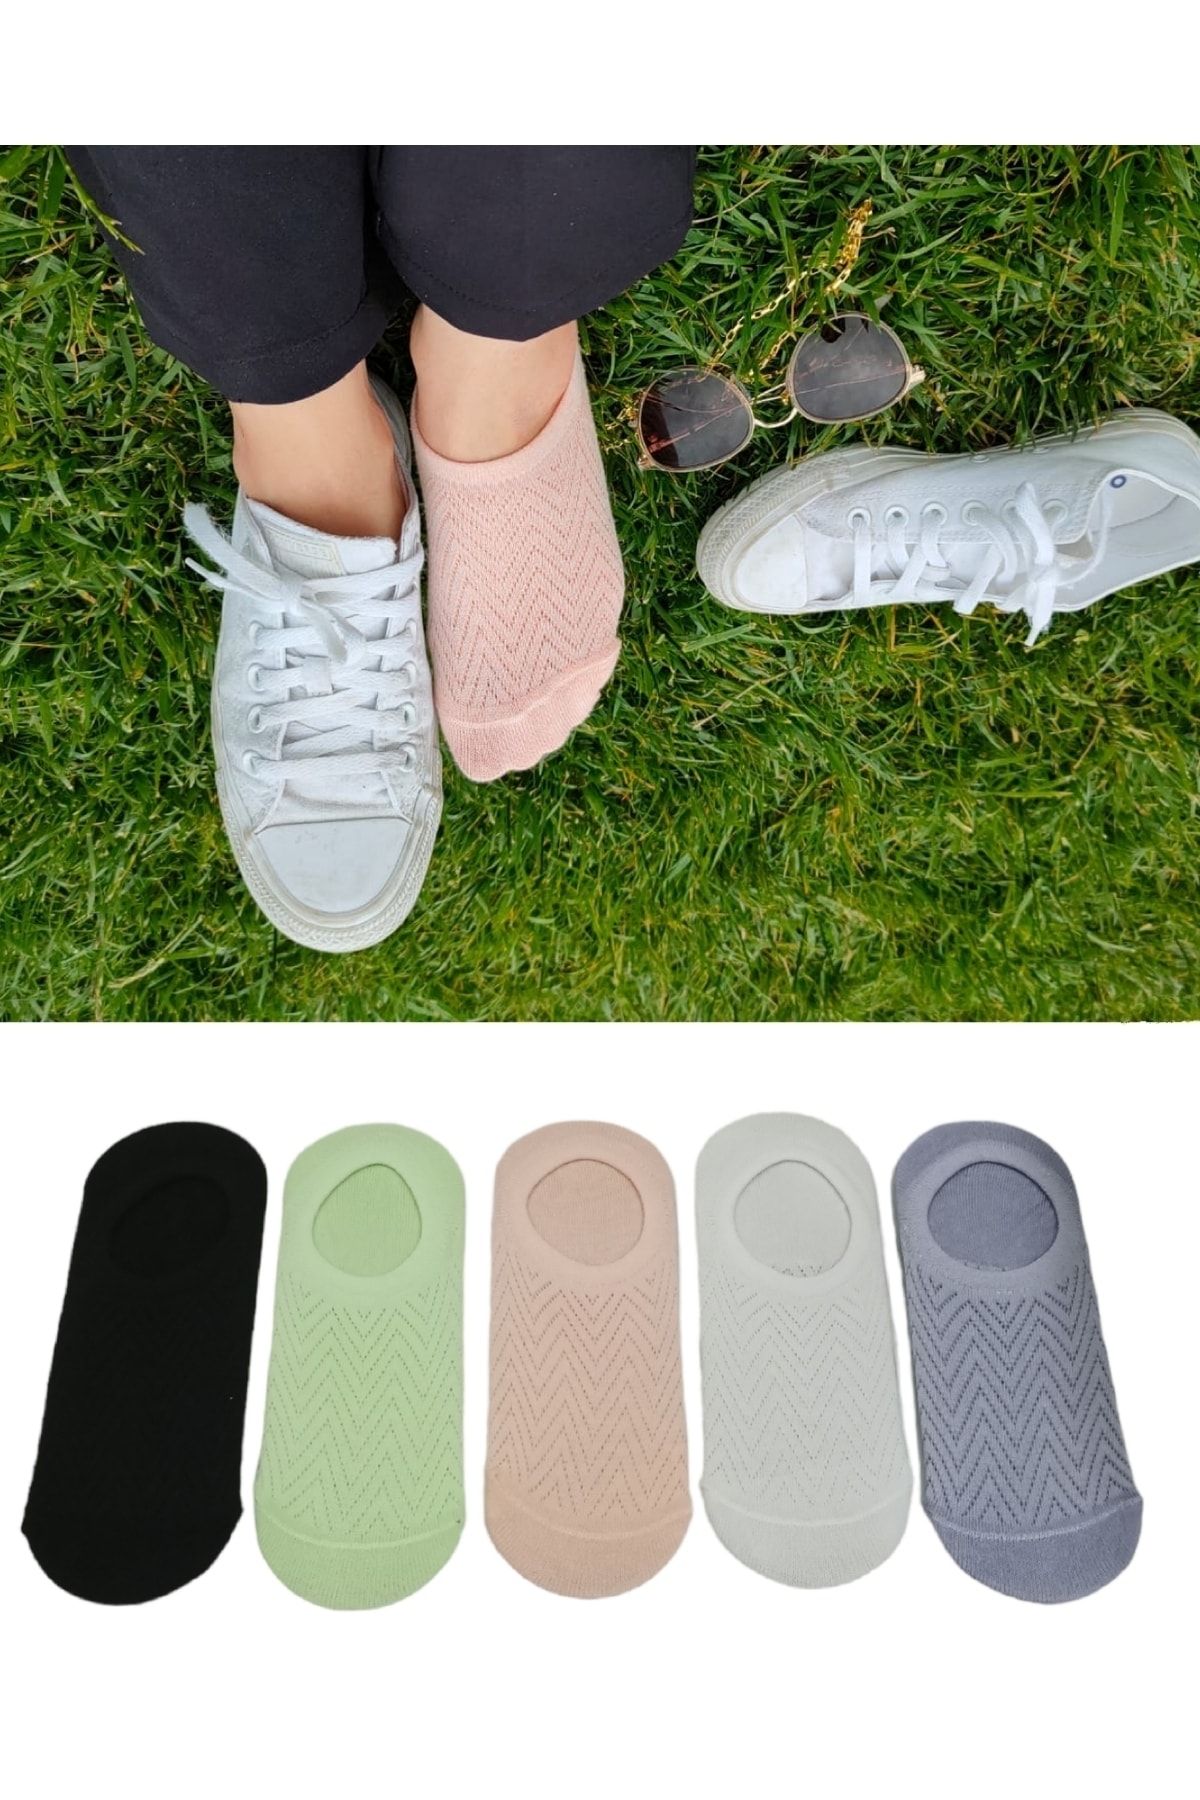 Fashion 4 PAIR SNEAKERS LOAFERS FASHION INVISIBLE SOCKS